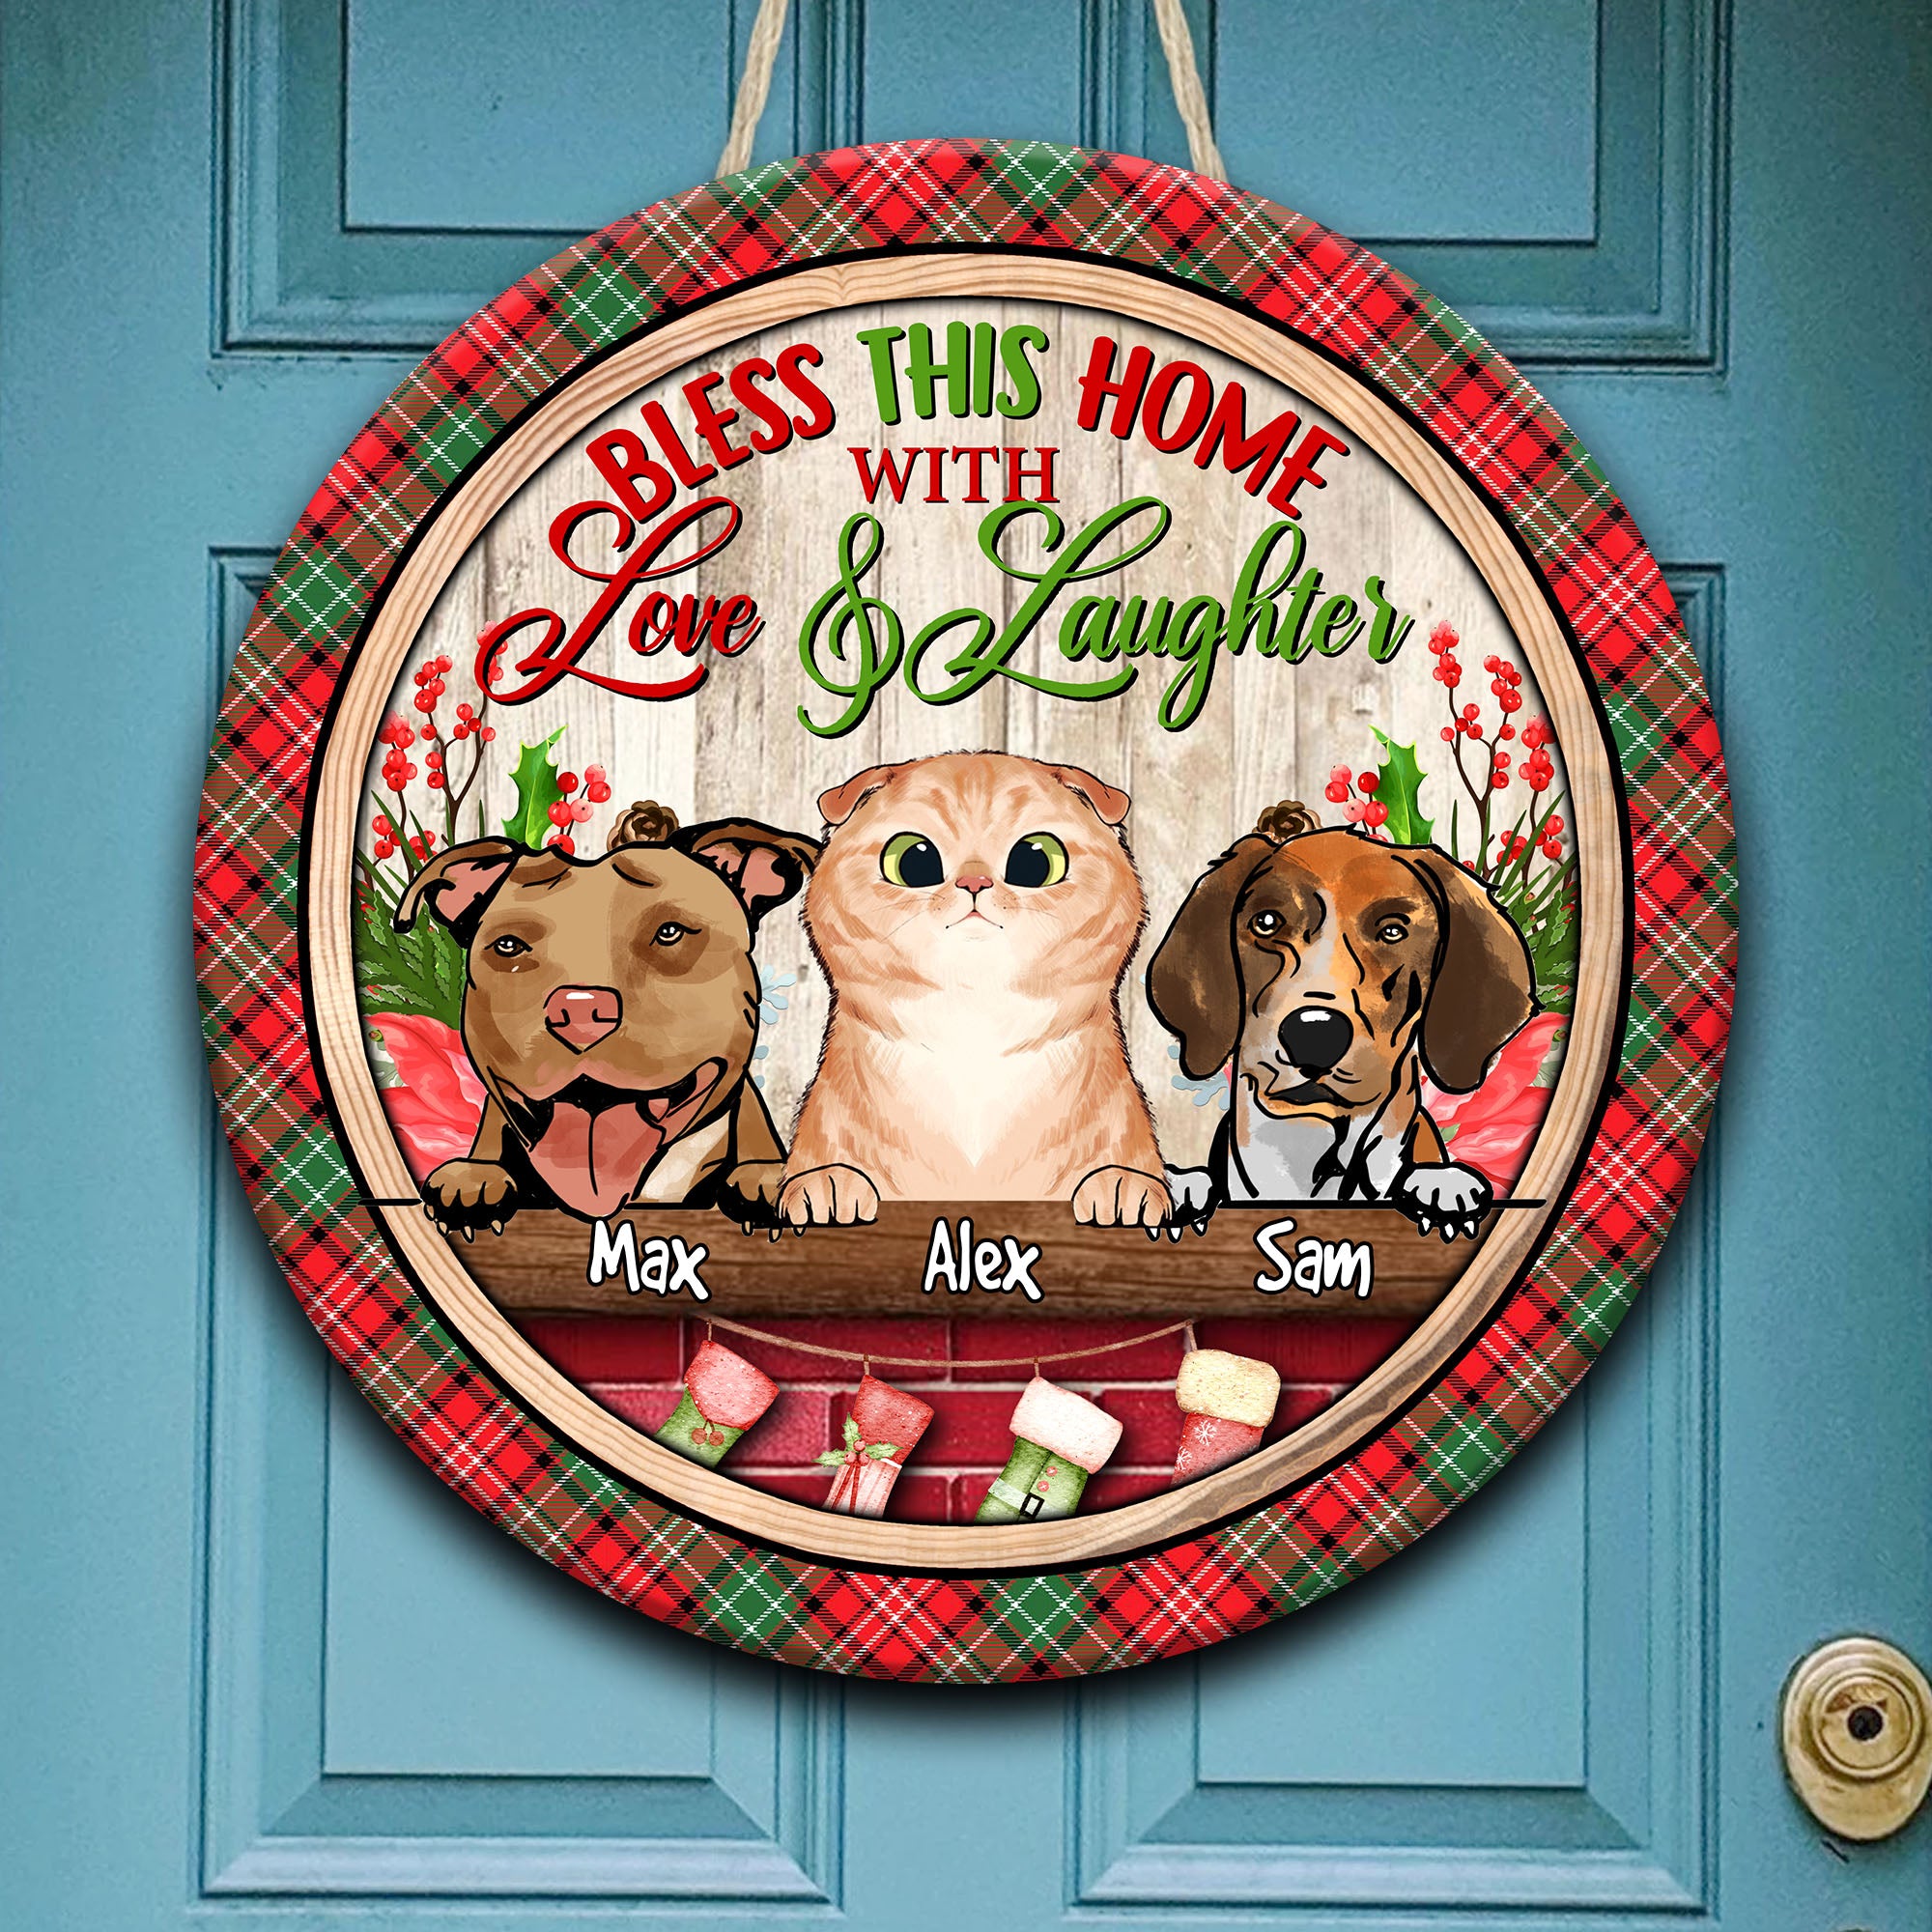 Bless This Home With Love and Laughter - Custom Pet And Name - Personalized Wooden Door Sign - Pet Lover Gift